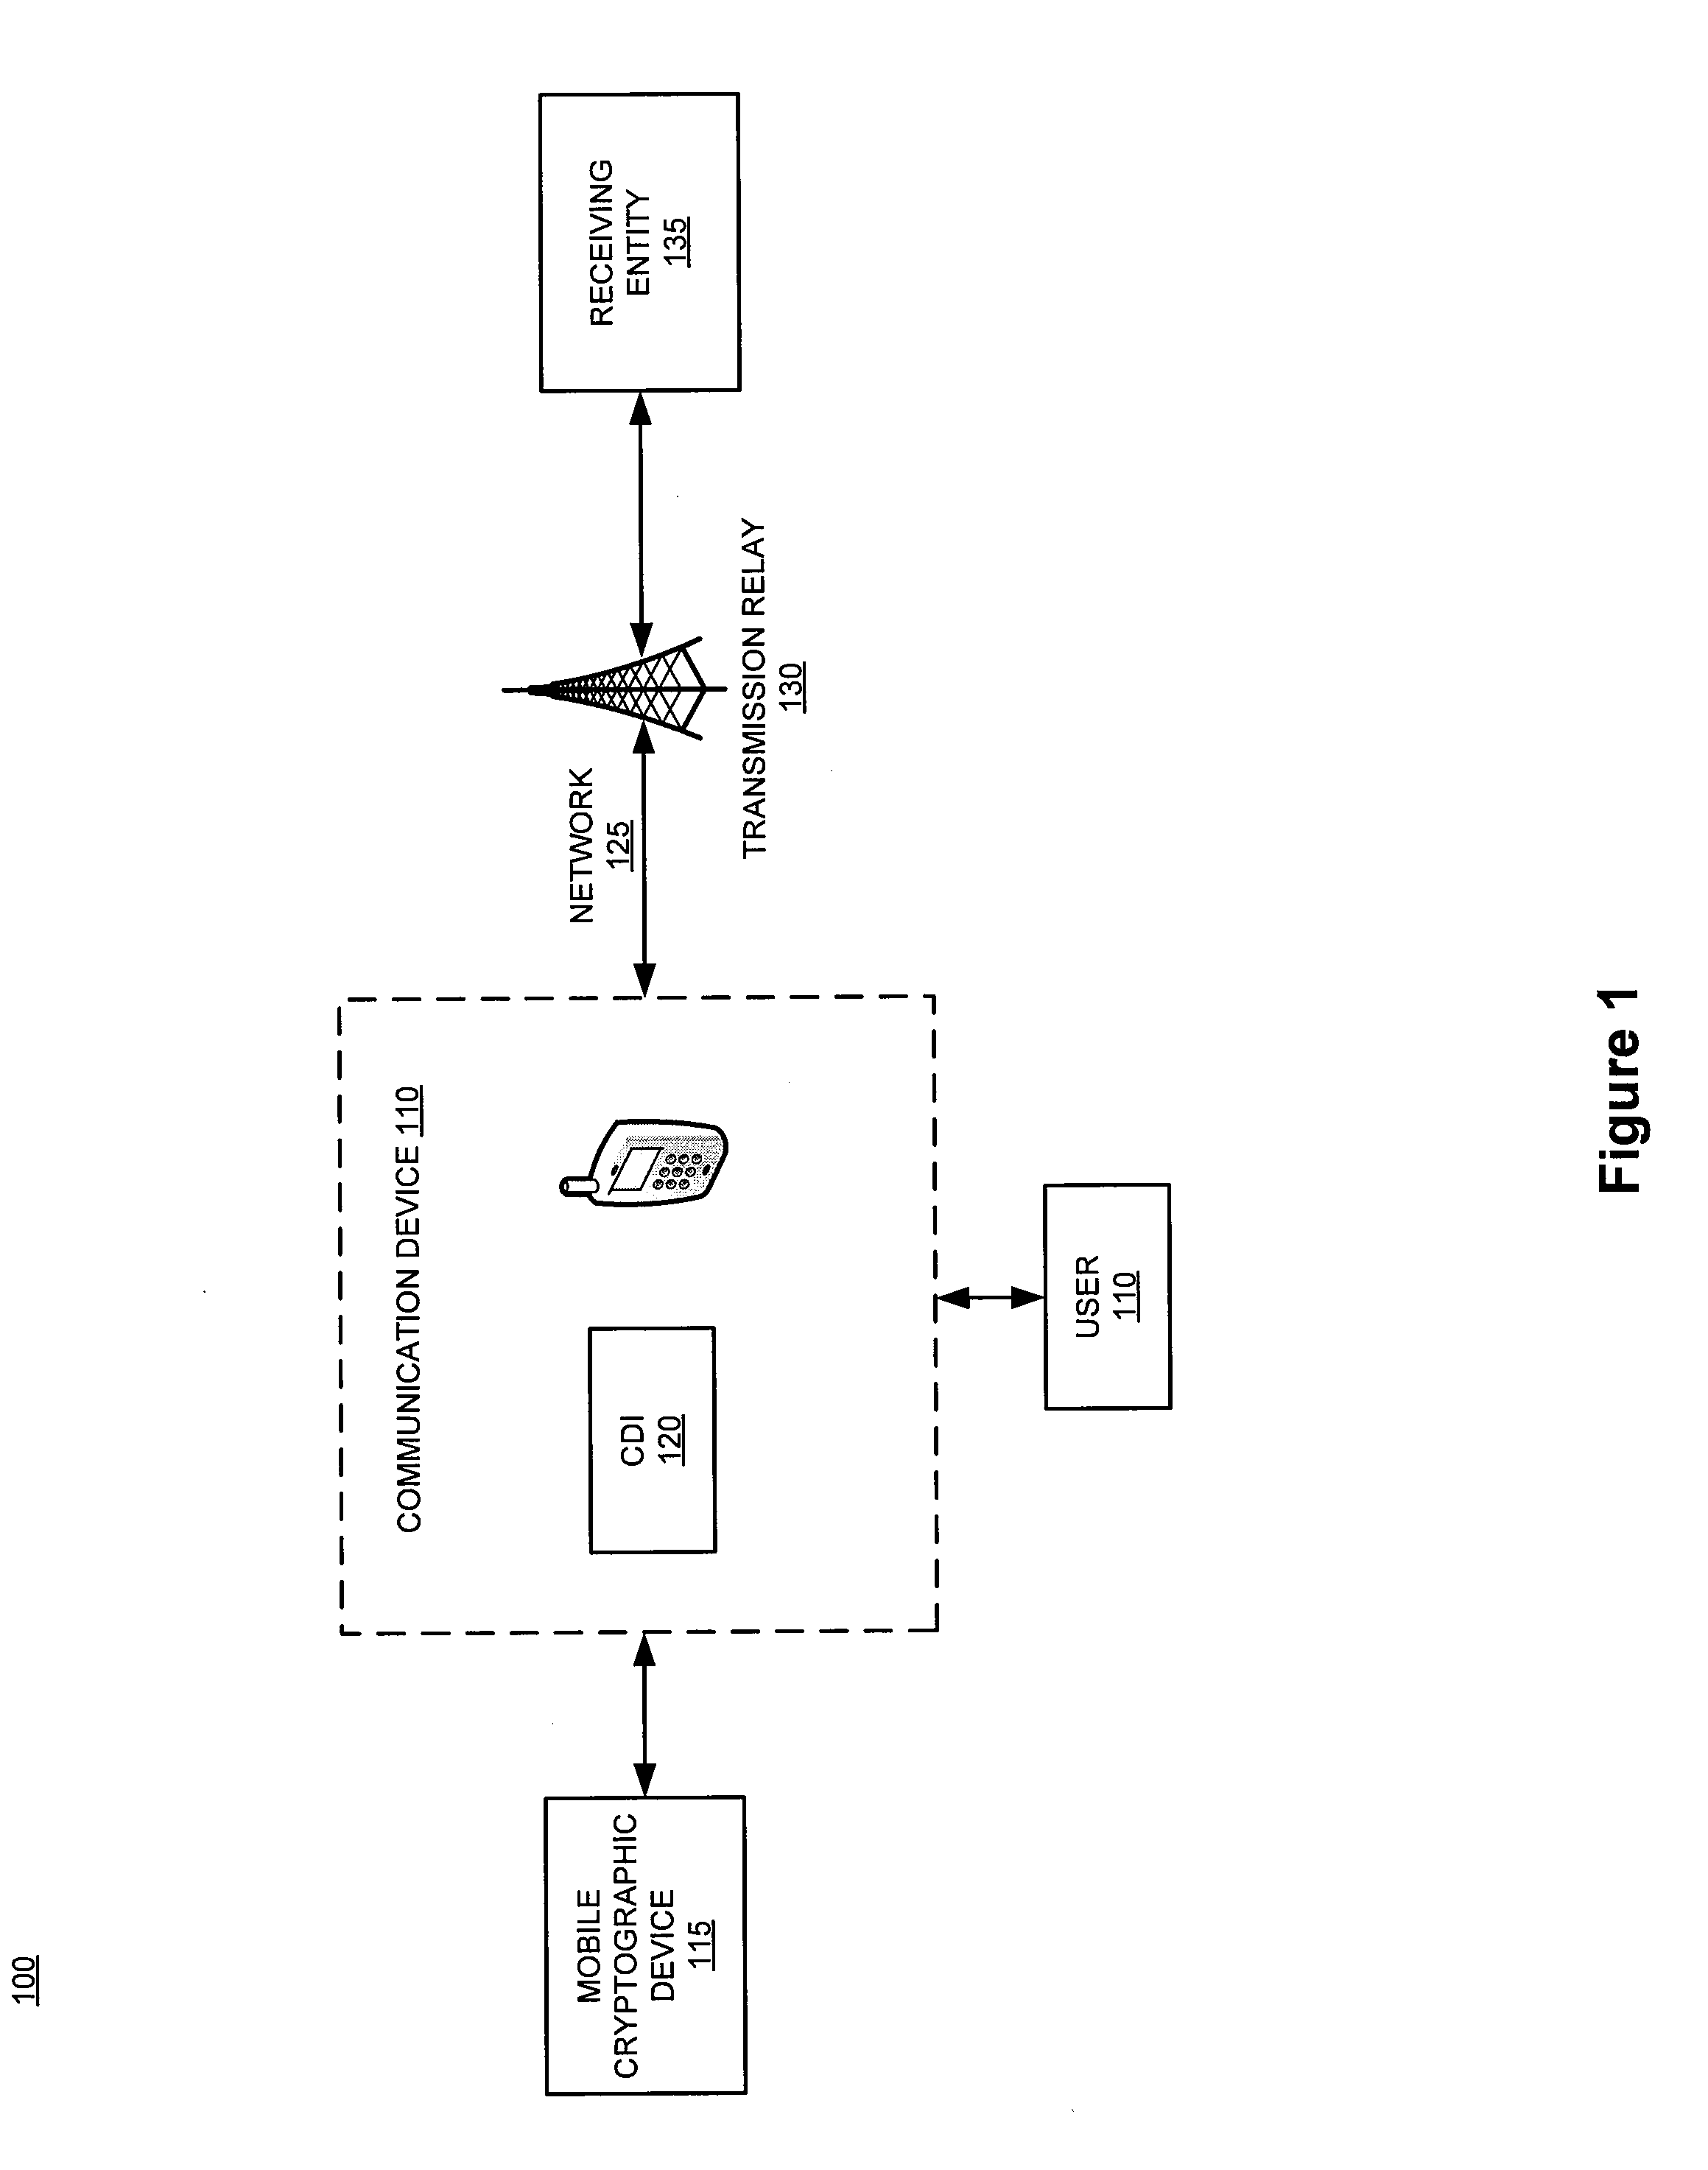 Device and system for facilitating communication and networking within a secure mobile environment